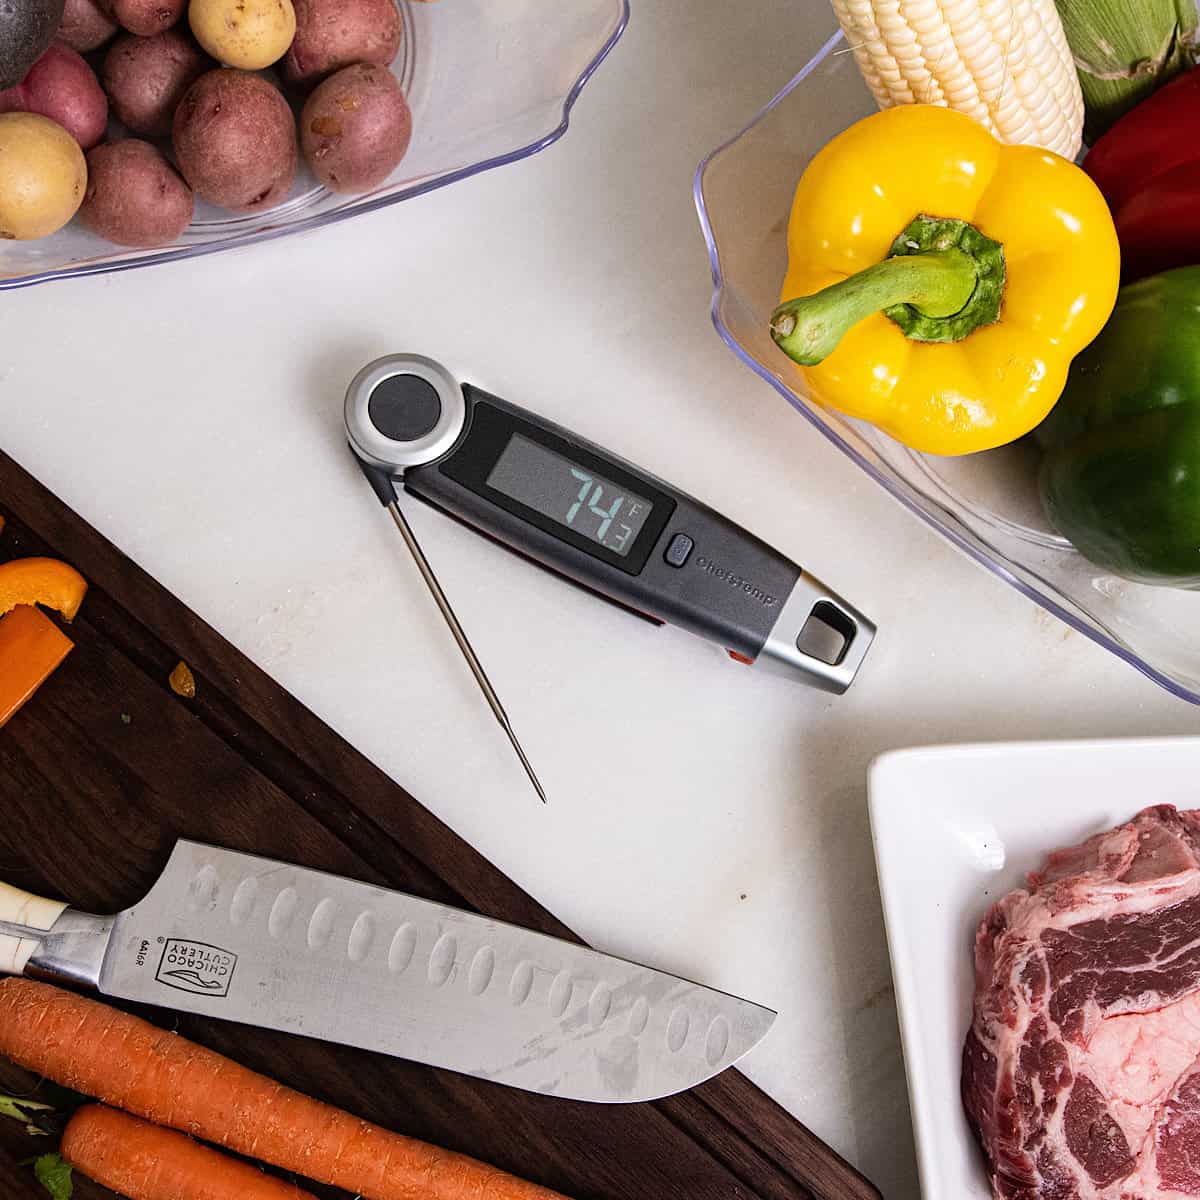 https://www.chefstemp.com/wp-content/uploads/2020/04/Finaltouch-X10-meat-thermometer.jpg